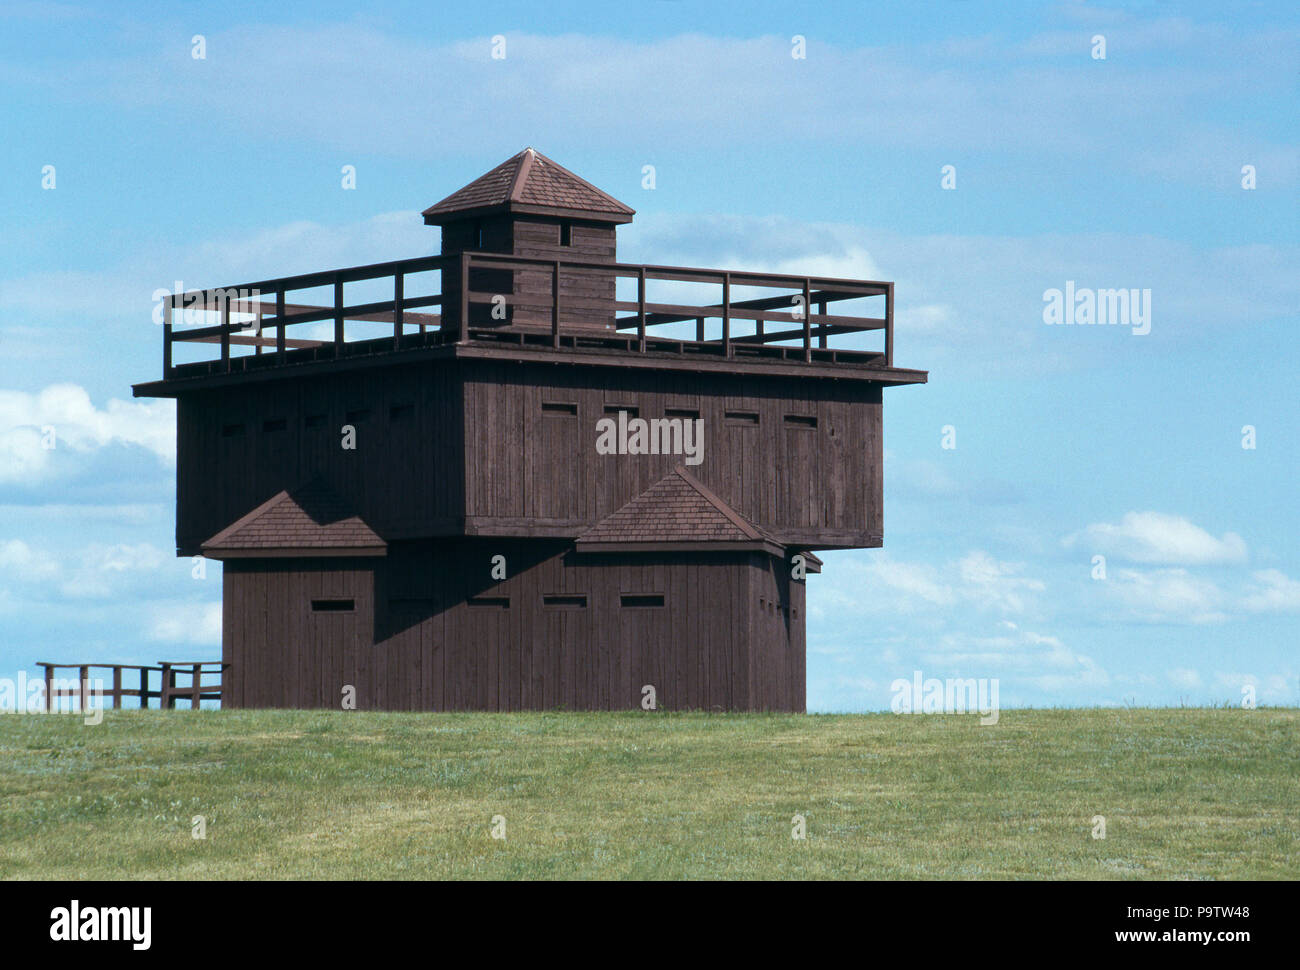 Fort McKeen blockhouse replica, renamed Fort Abraham Lincoln, built during the Indian Wars, North Dakota, 1870s. Photograph Stock Photo